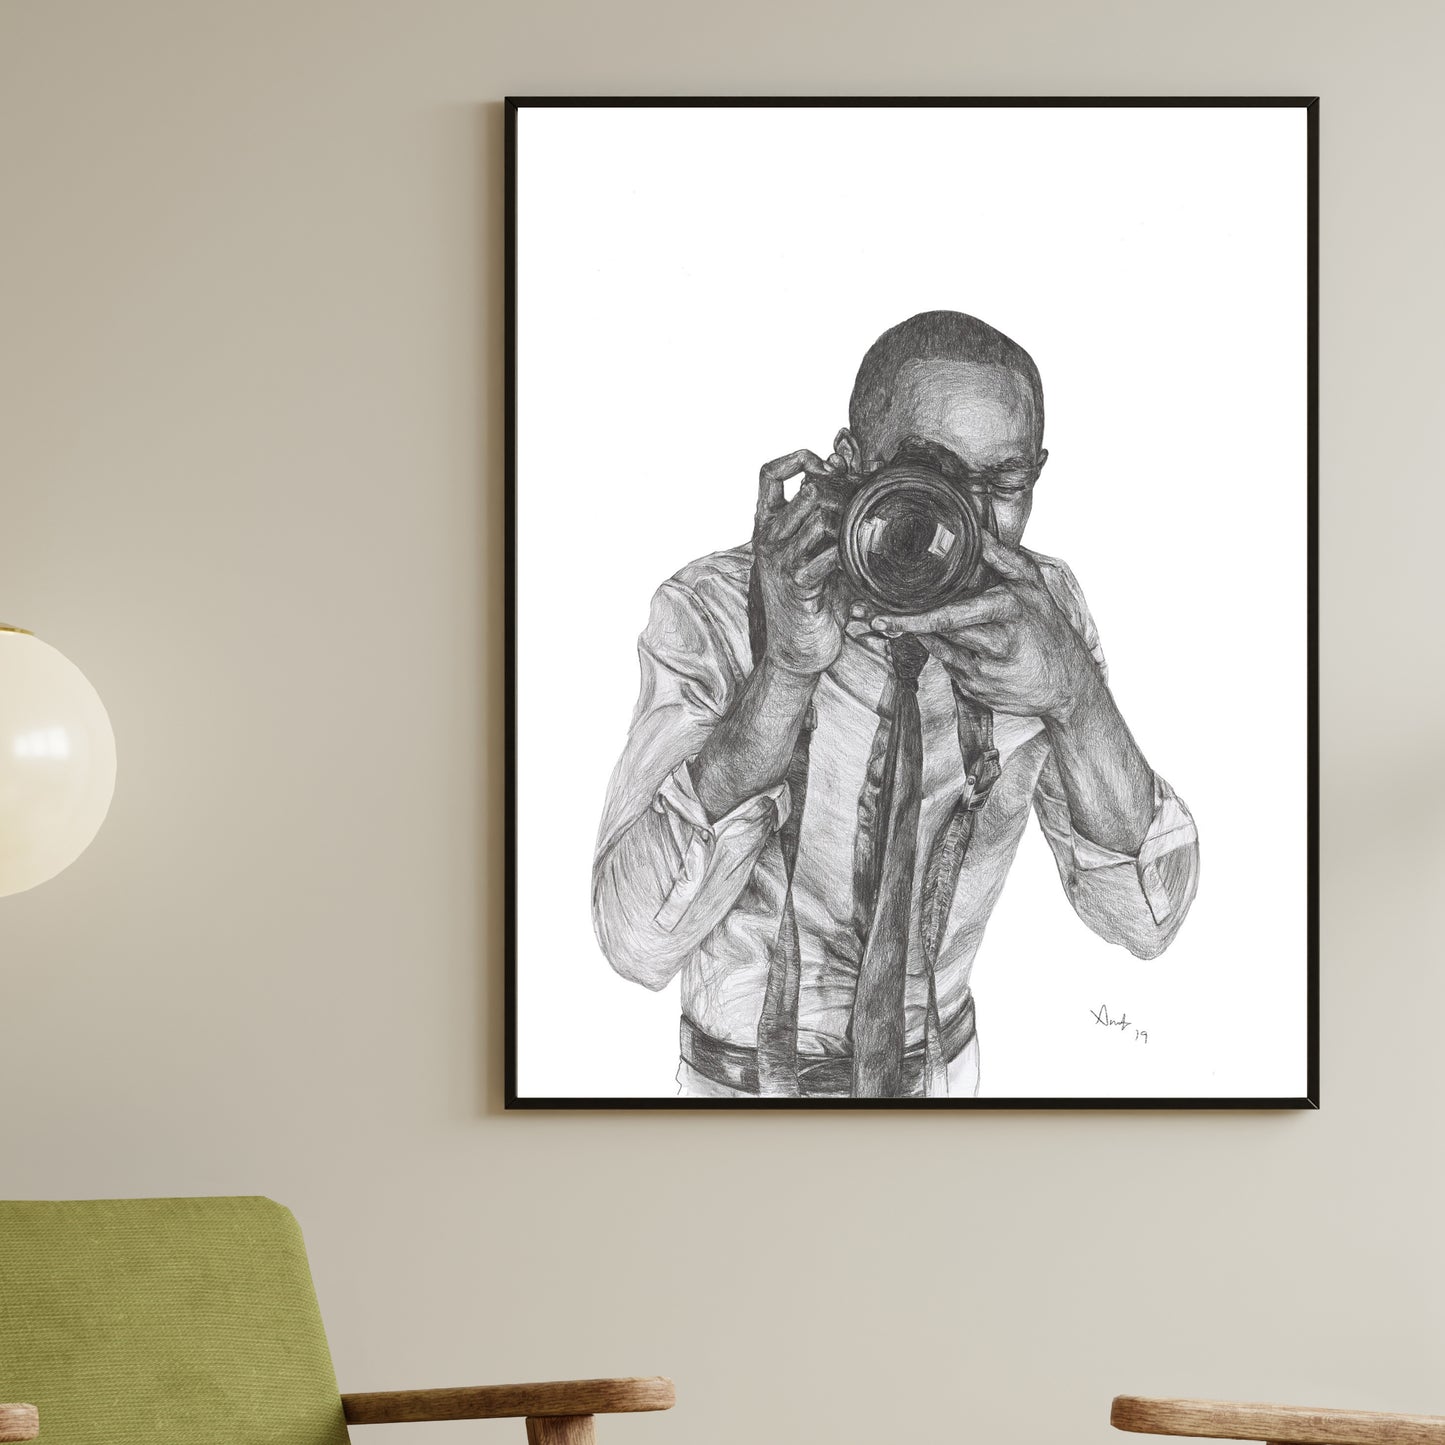 Focus-Limited Edition Giclee Print